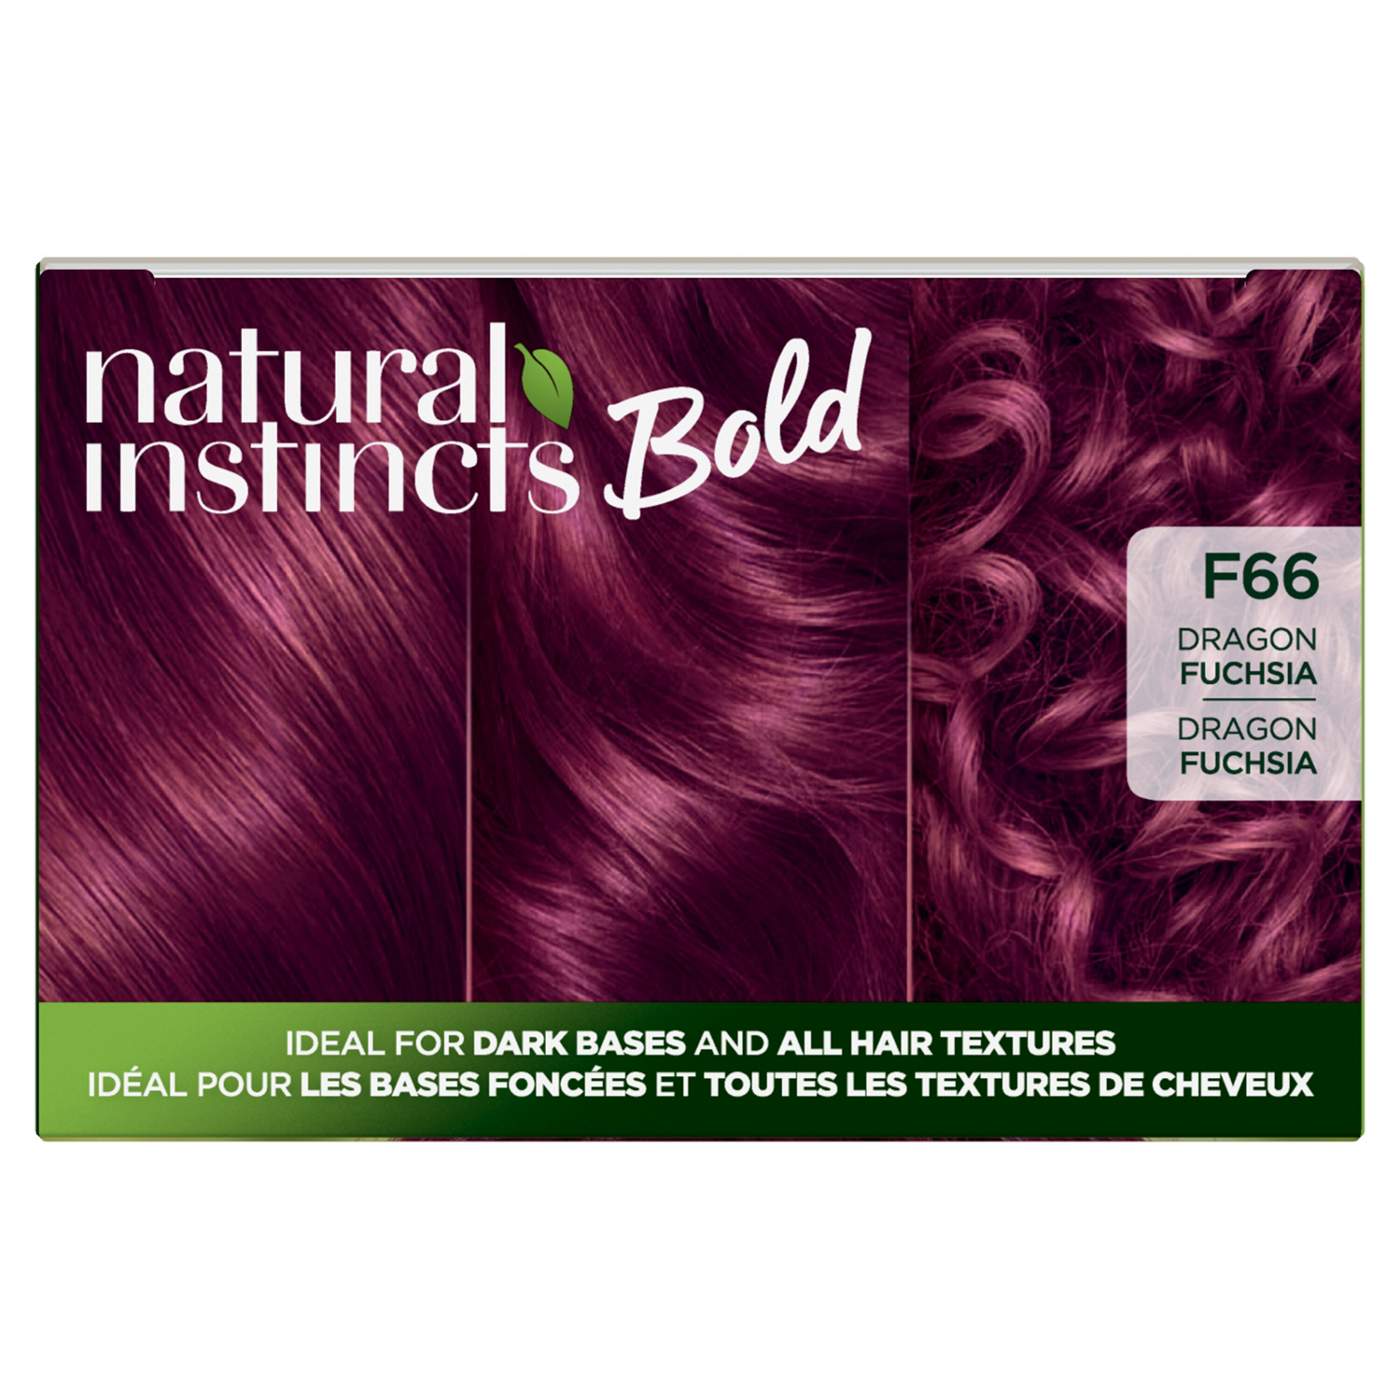 Clairol Natural Instincts Bold Permanent Hair Color - F66 Dragon Fuchsia ; image 4 of 6